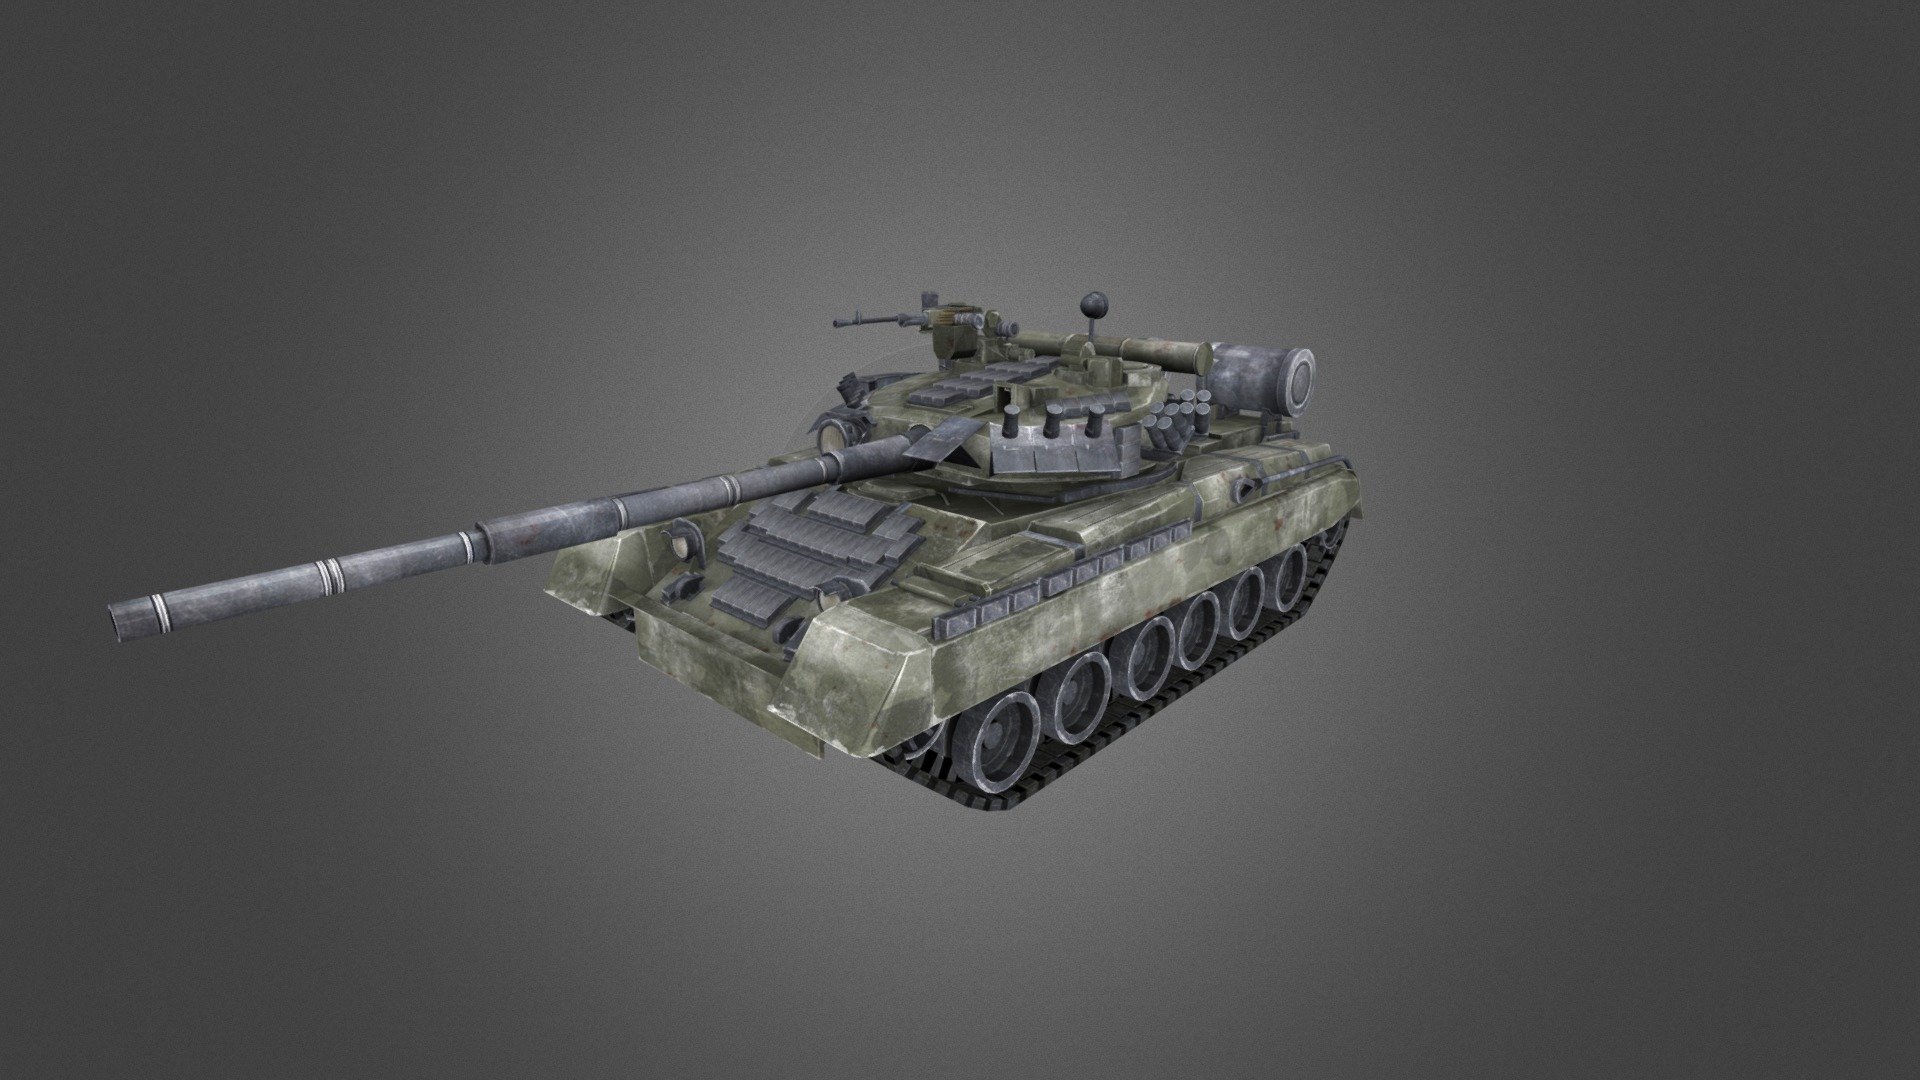 Game Ready low poly 3d model of T-80UD Main Battle Tank

Download: http://gamedev.cgduck.pro - T-80UD Main Battle Tank - 3D model by CG Duck (@cg_duck) 3d model